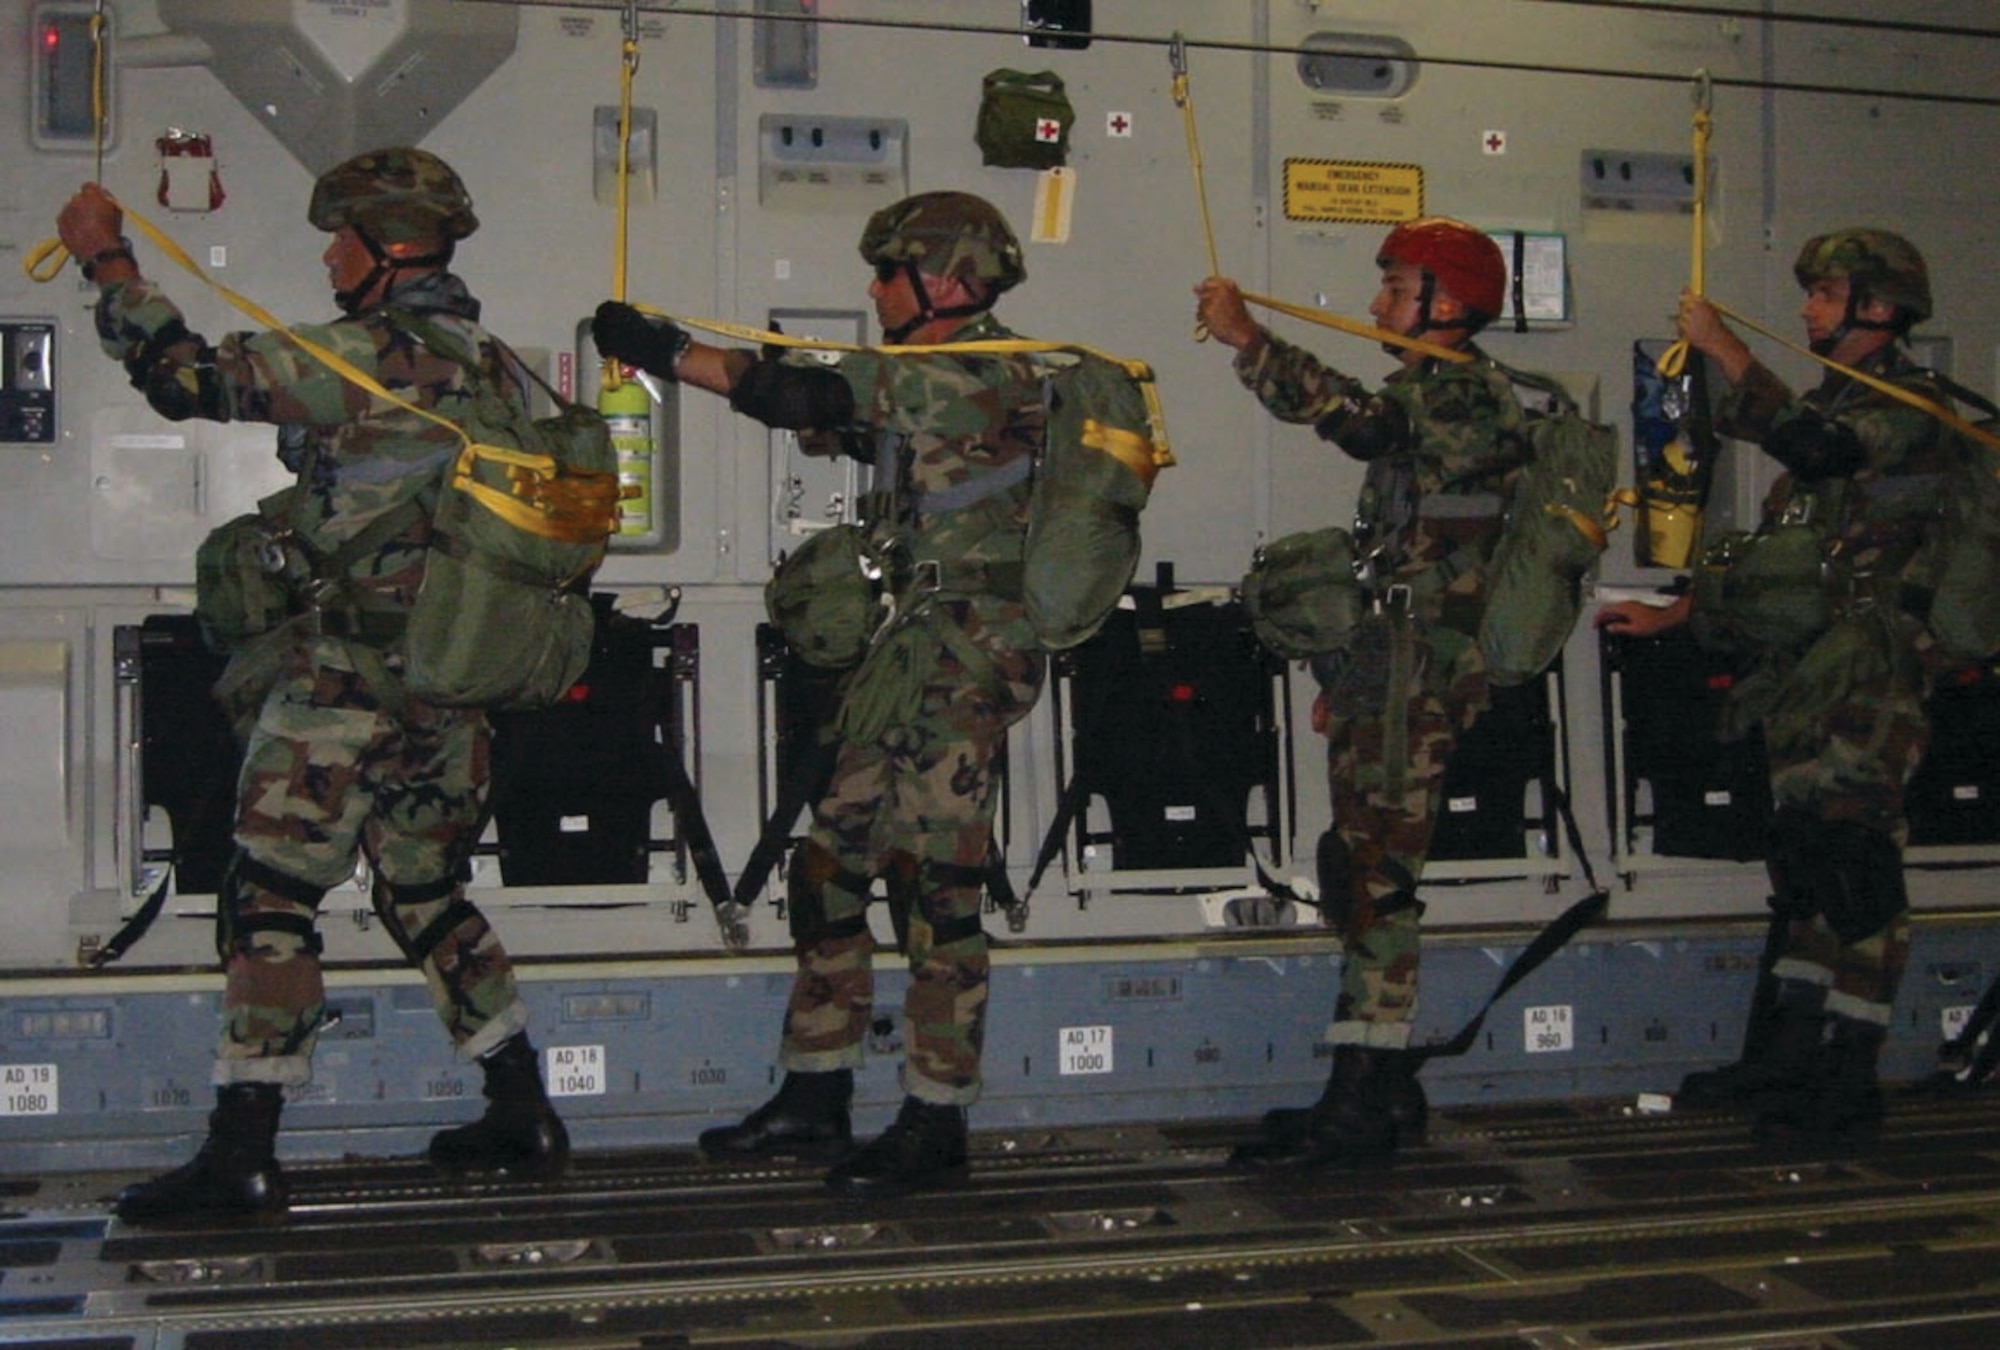 Four 36th Contingency Response Group Airman stand ready to parachute from a C-17.  